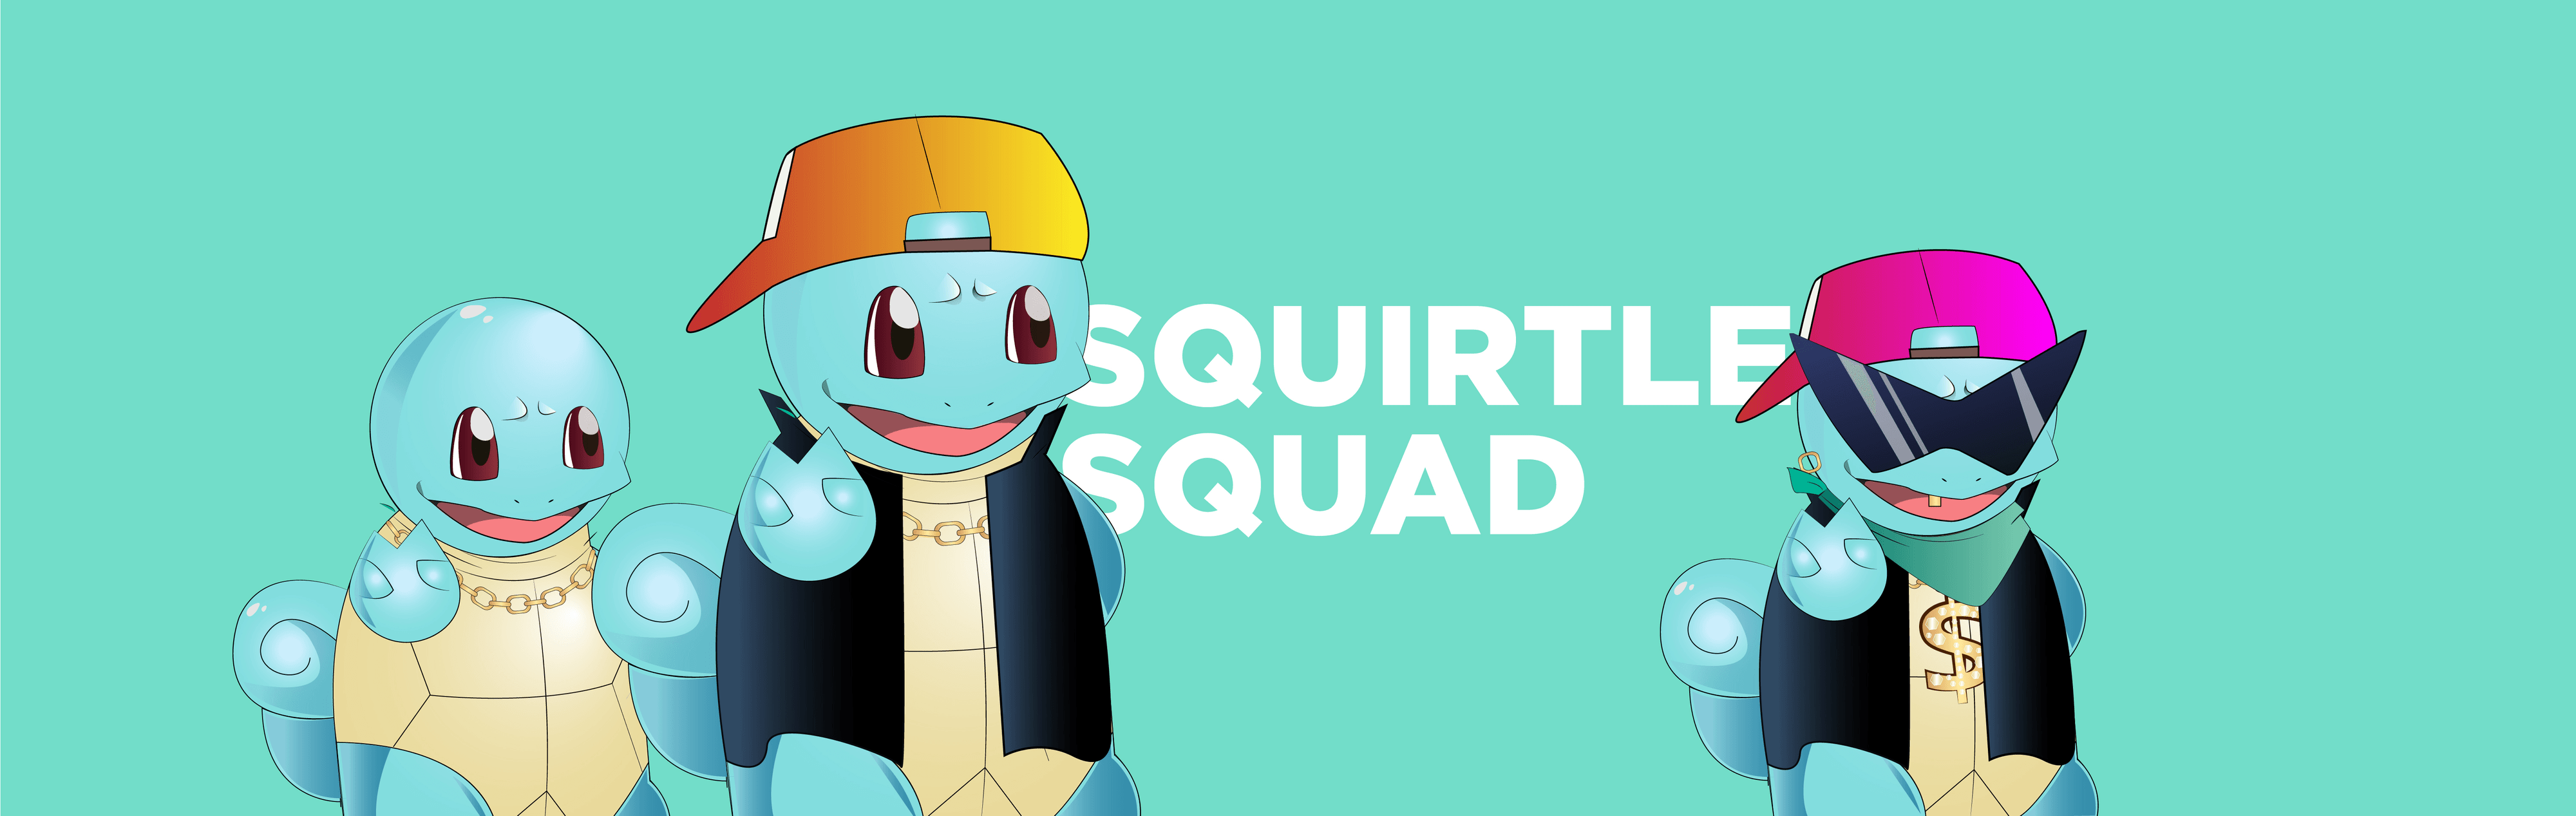 Squirtle_SQUAD_nft 橫幅